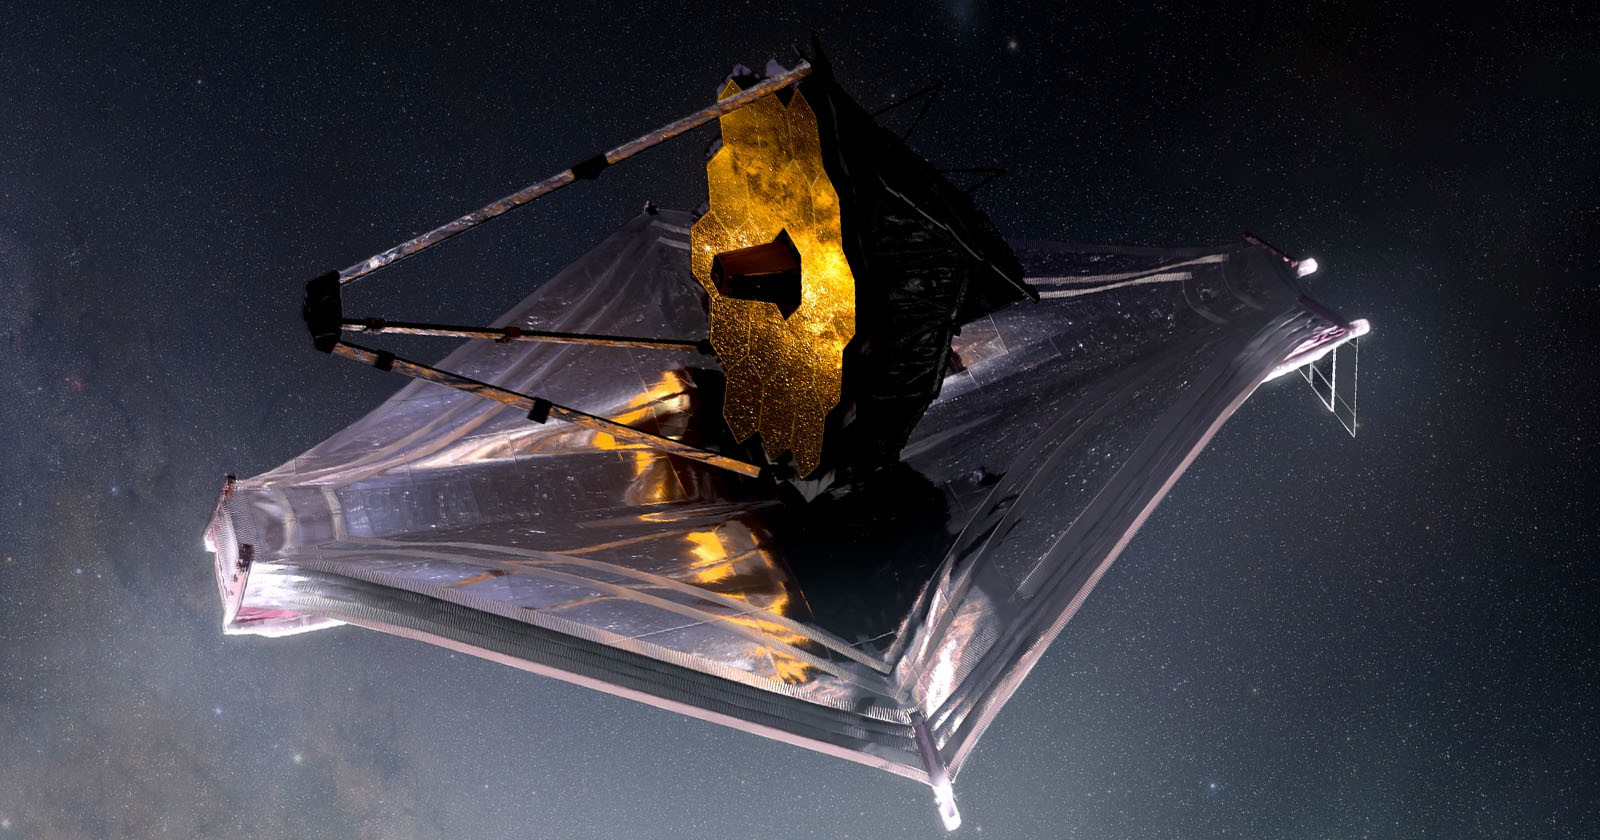  james webb telescope first full-color photos released july 